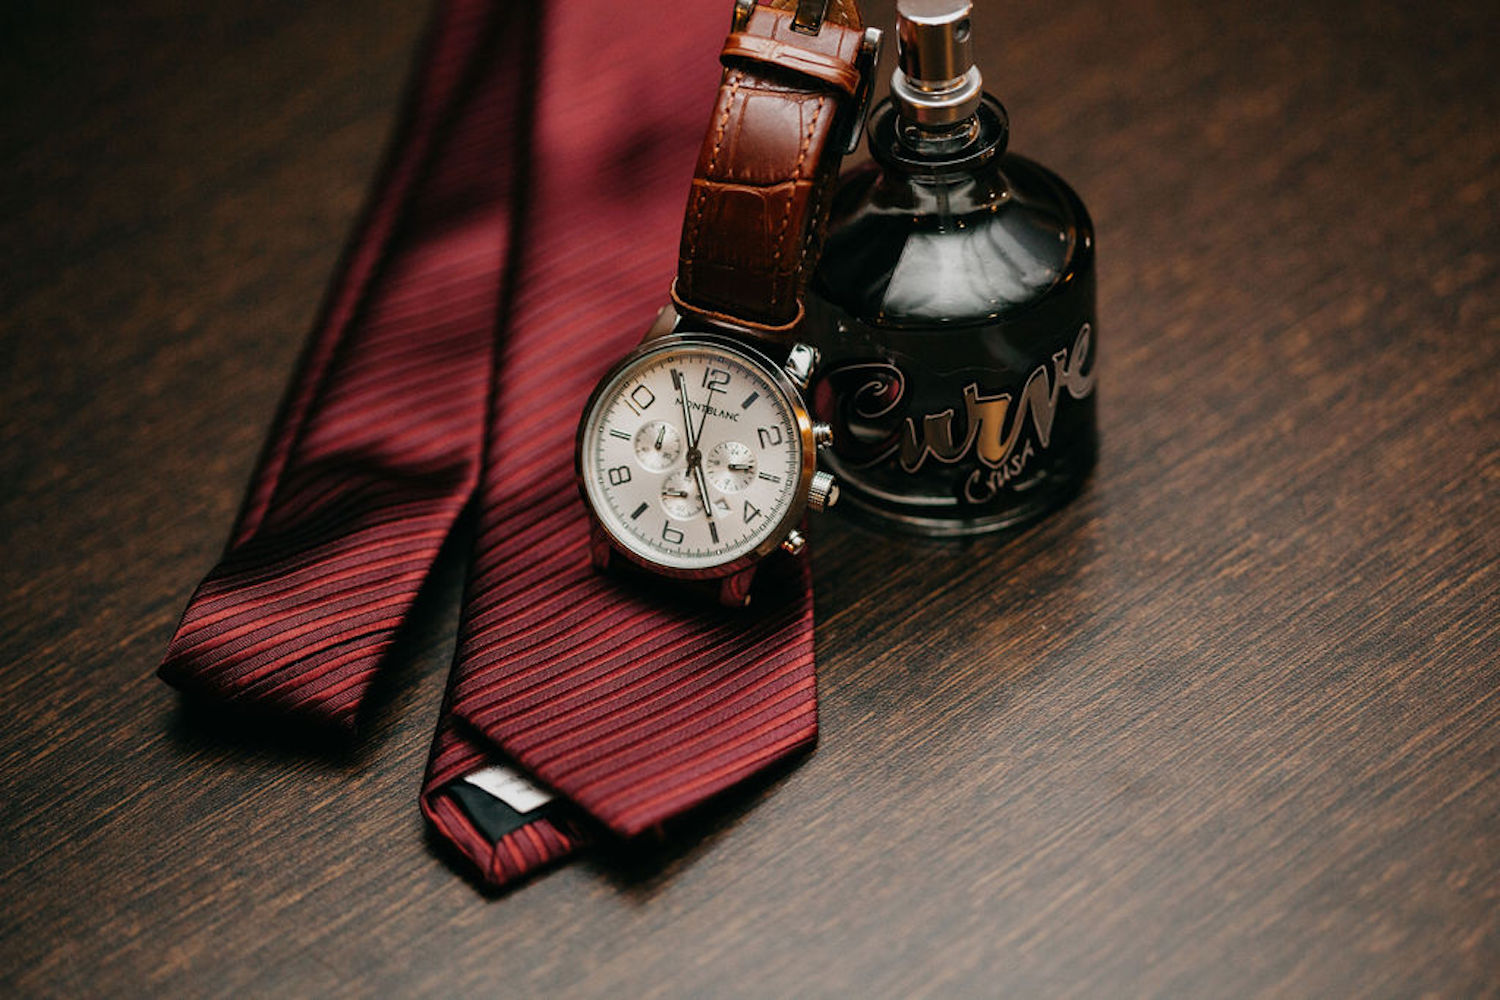 Grooms tie, watch and cologne